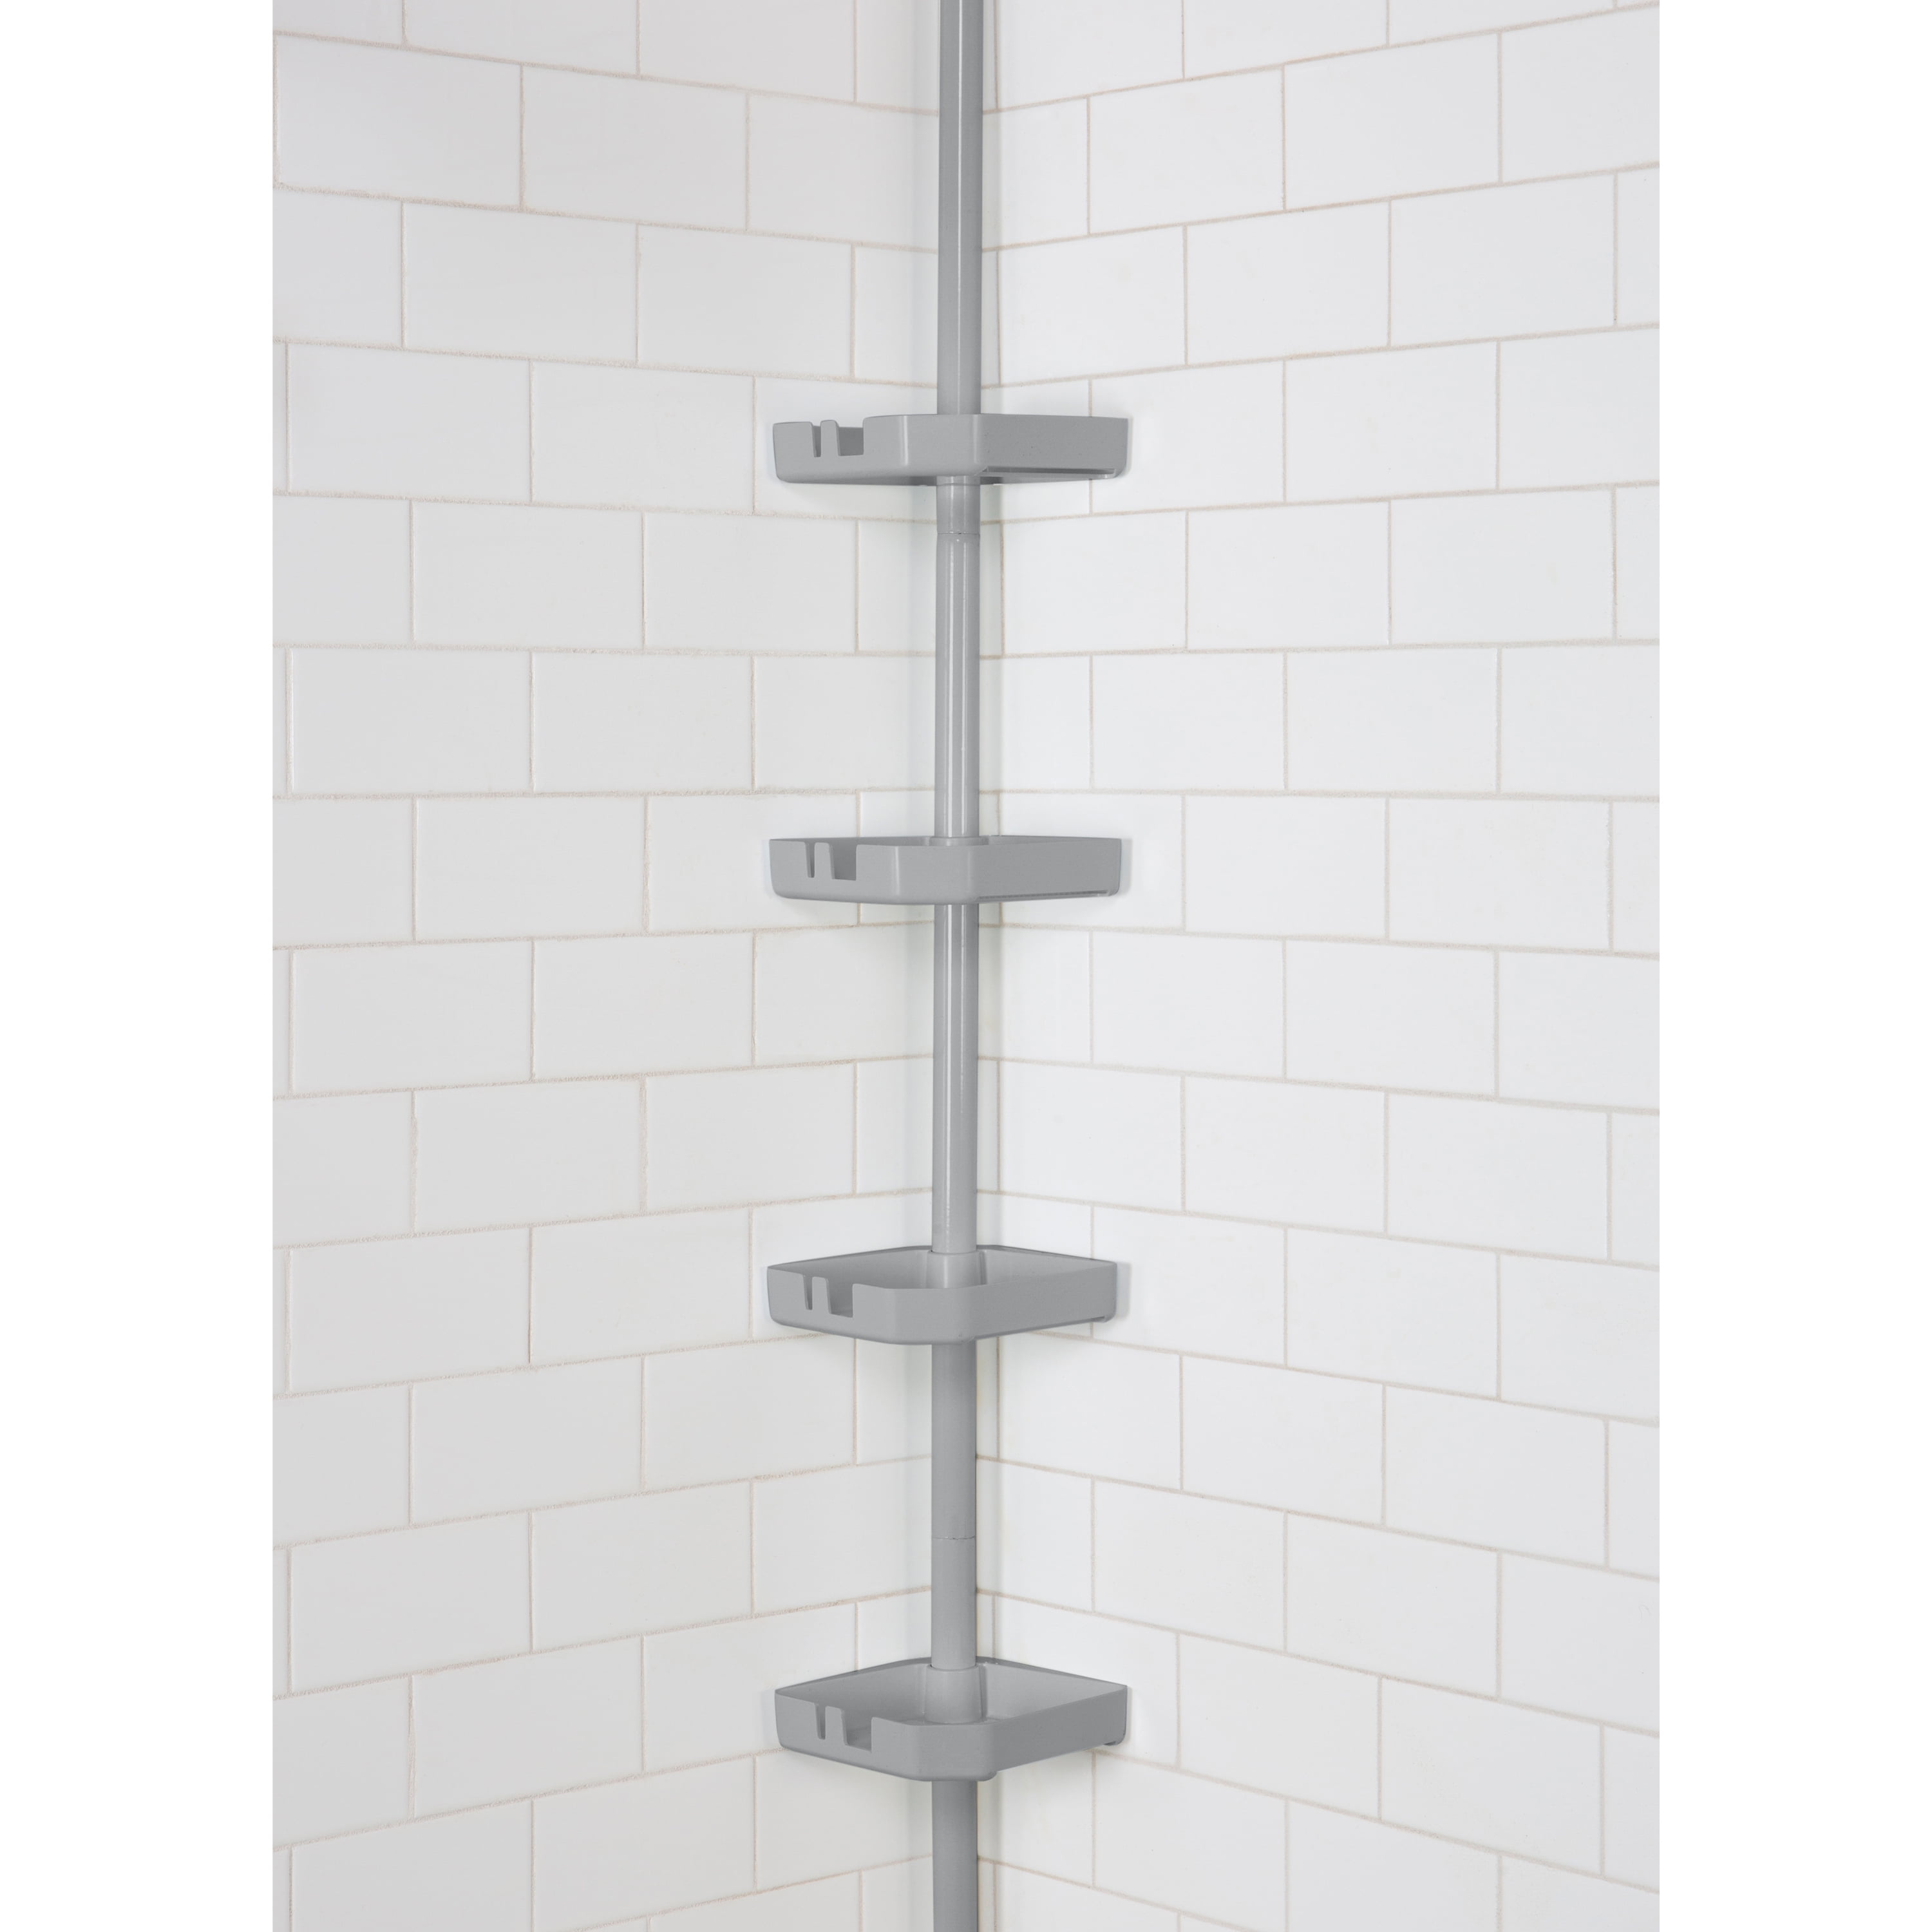 Best Shower Caddy 2022  Hanging and Corner Shower Caddy